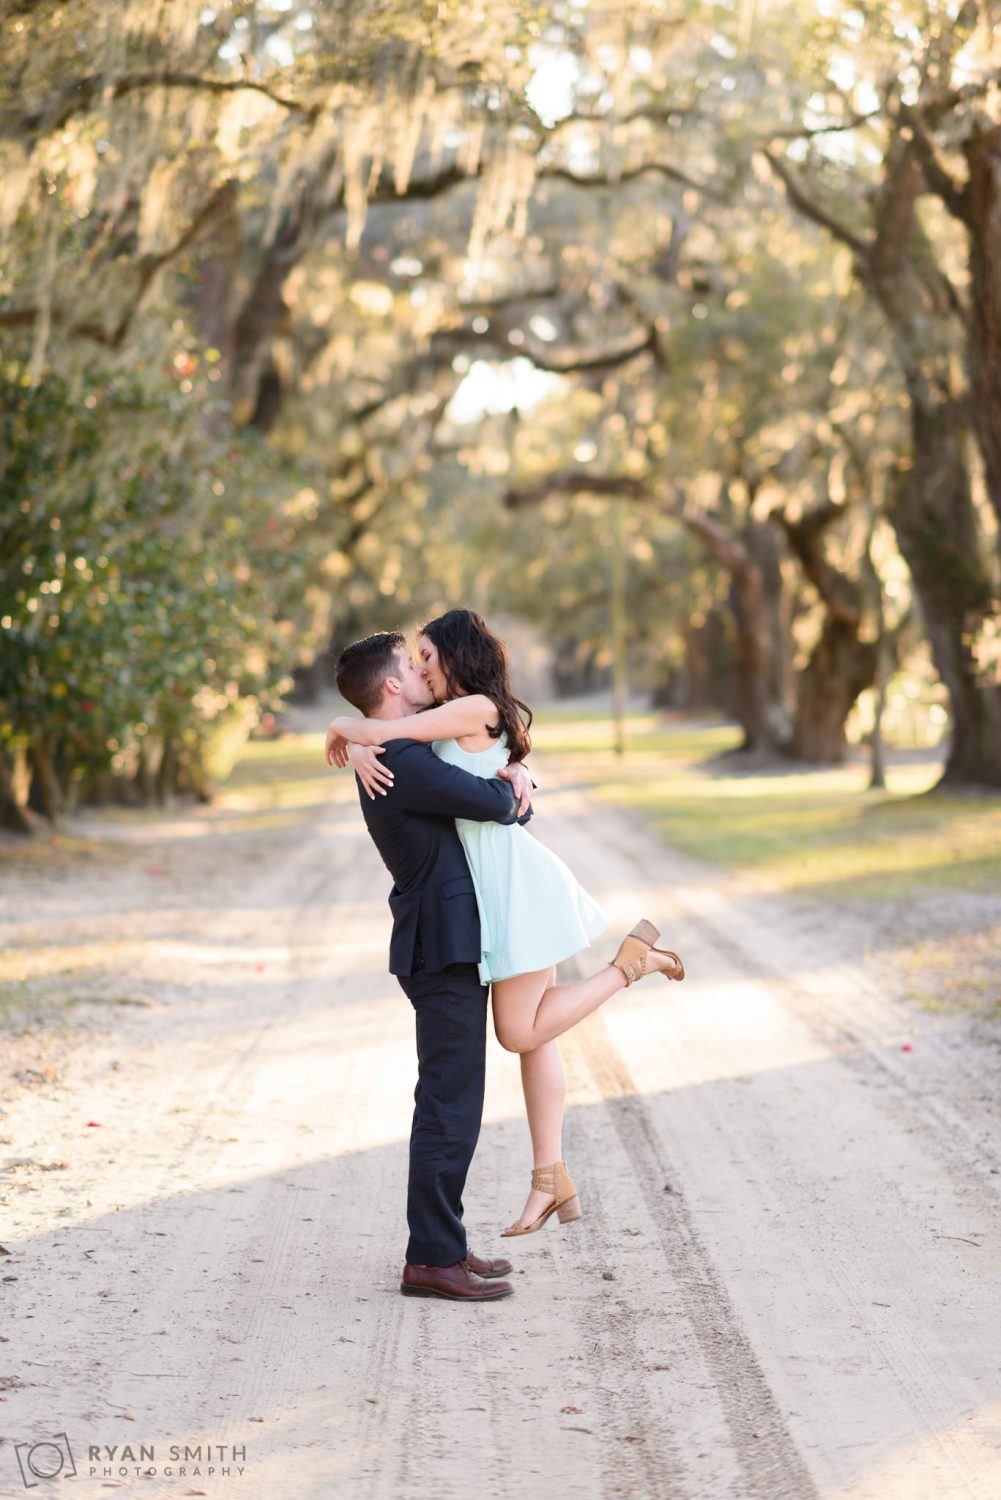 Guy lifting girl in the air for a kiss Mansfield Plantation, Georgetown